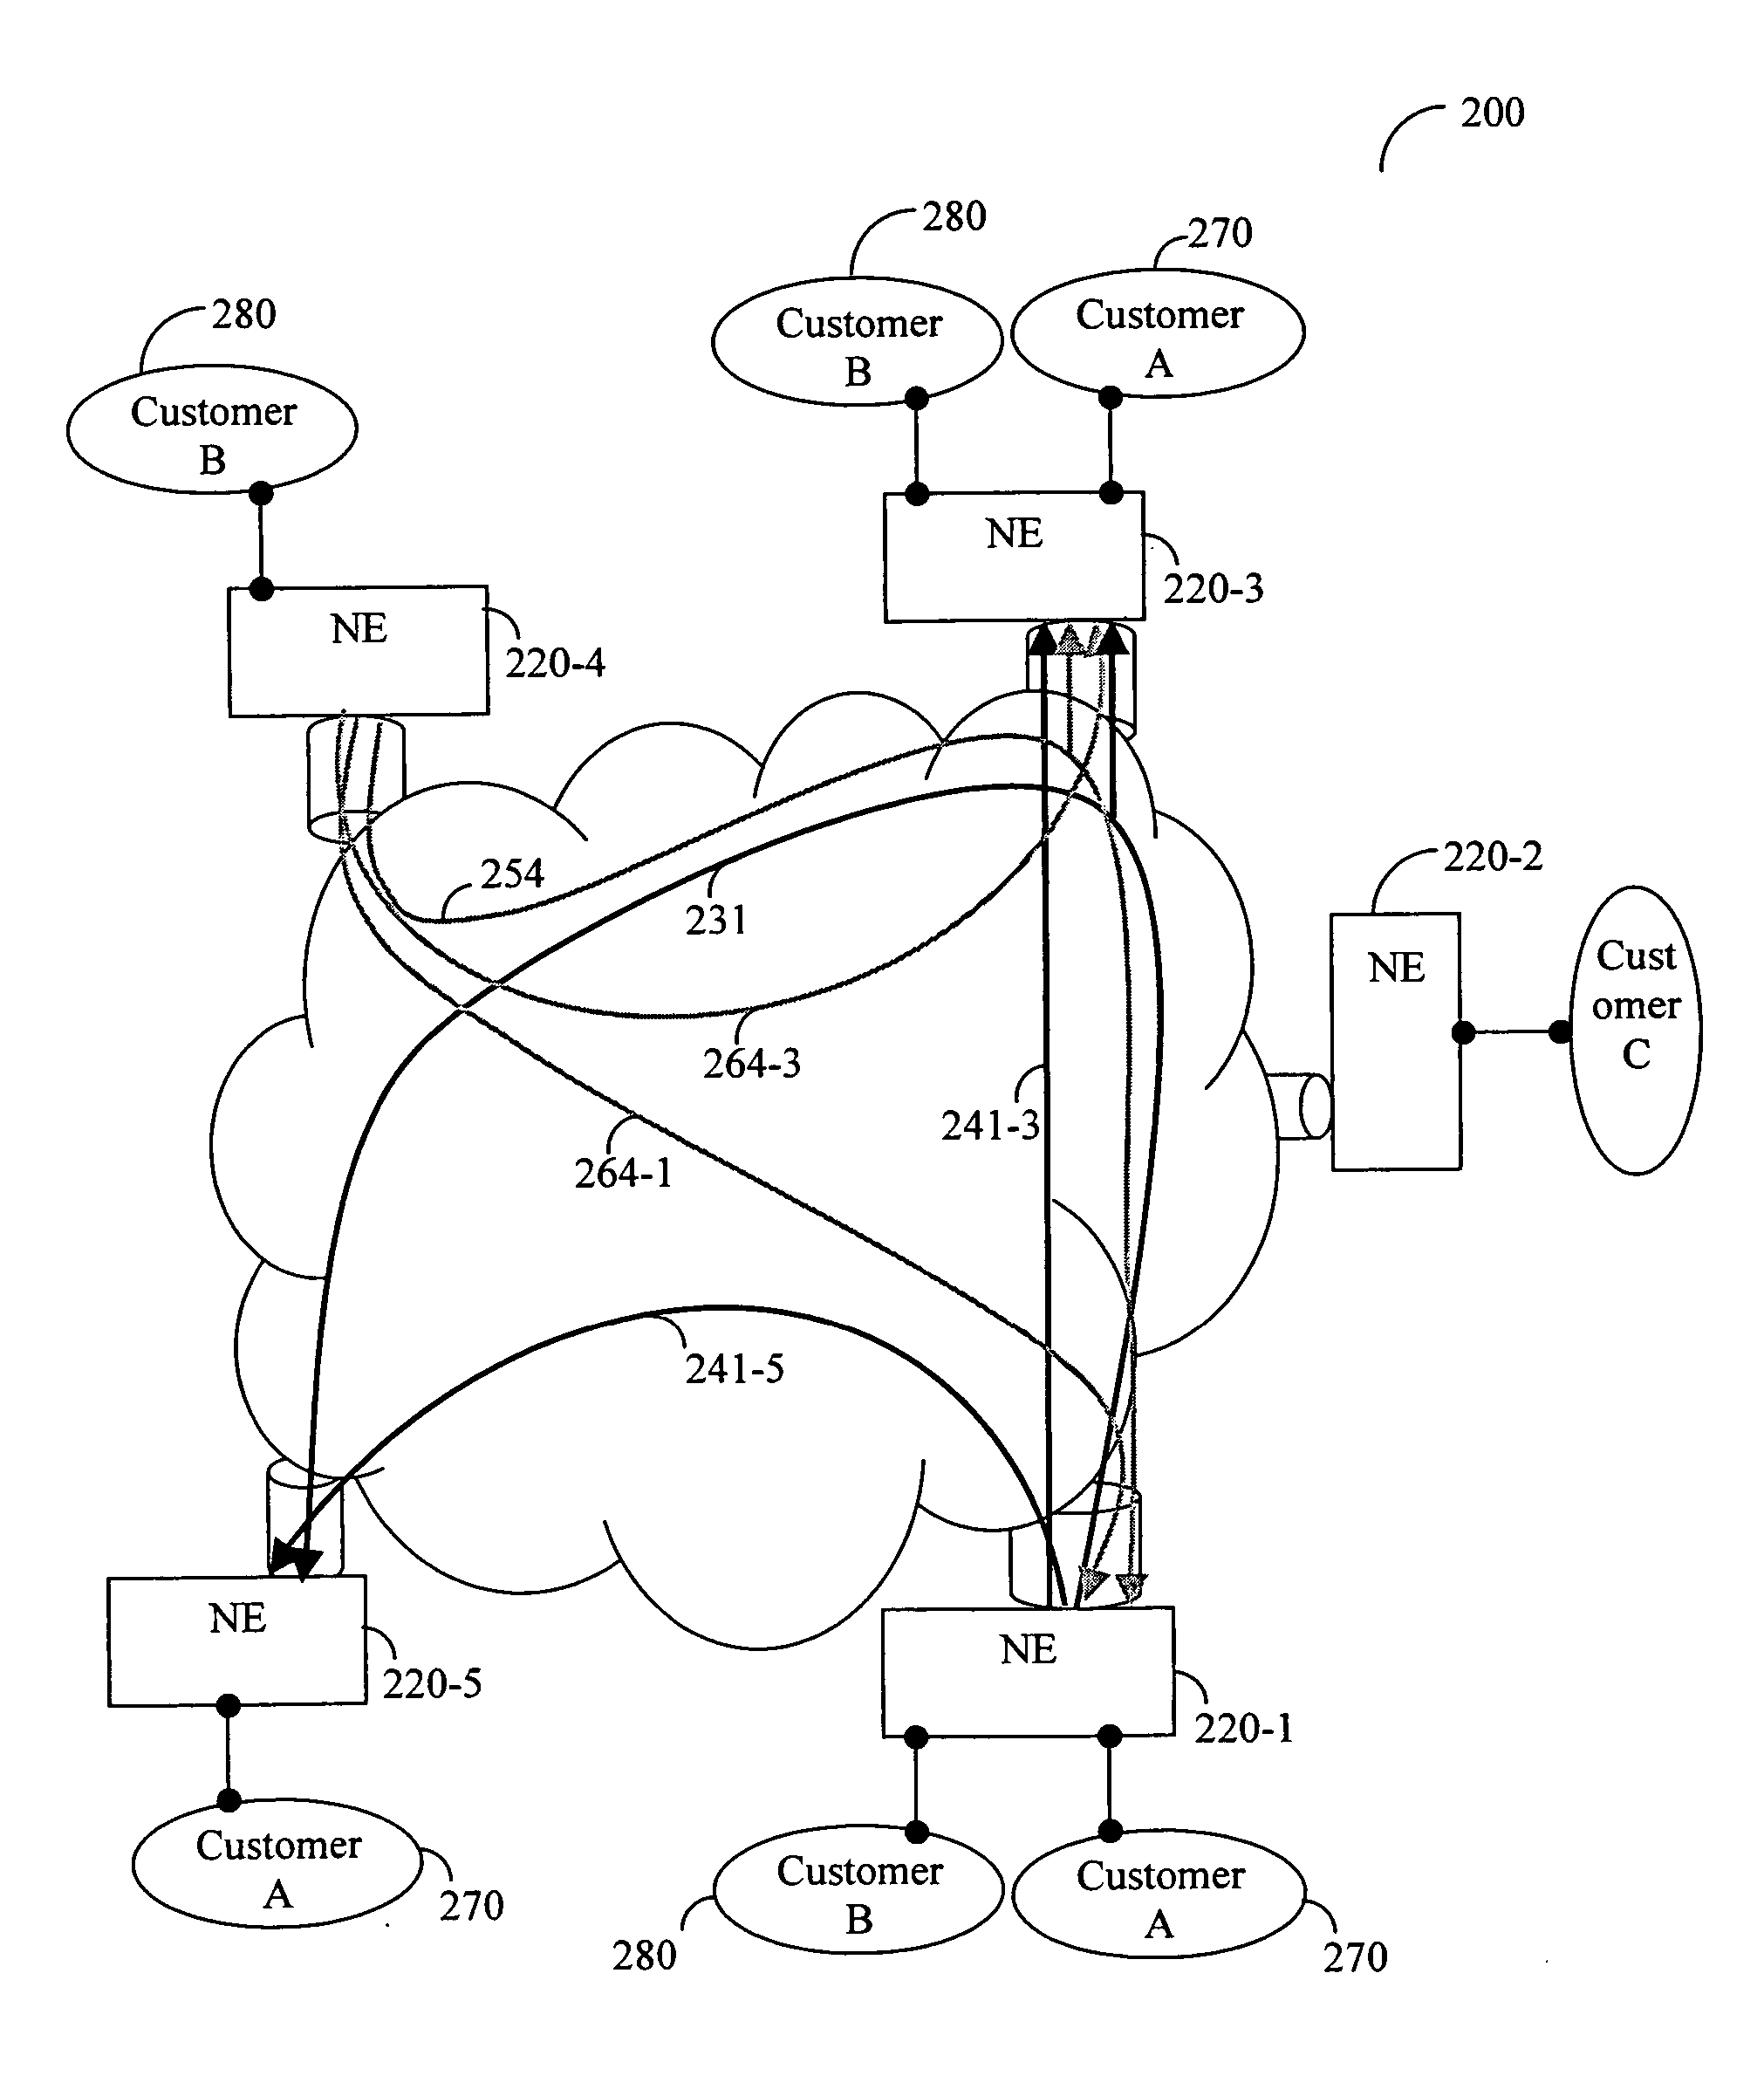 Method for providing efficient multipoint network services